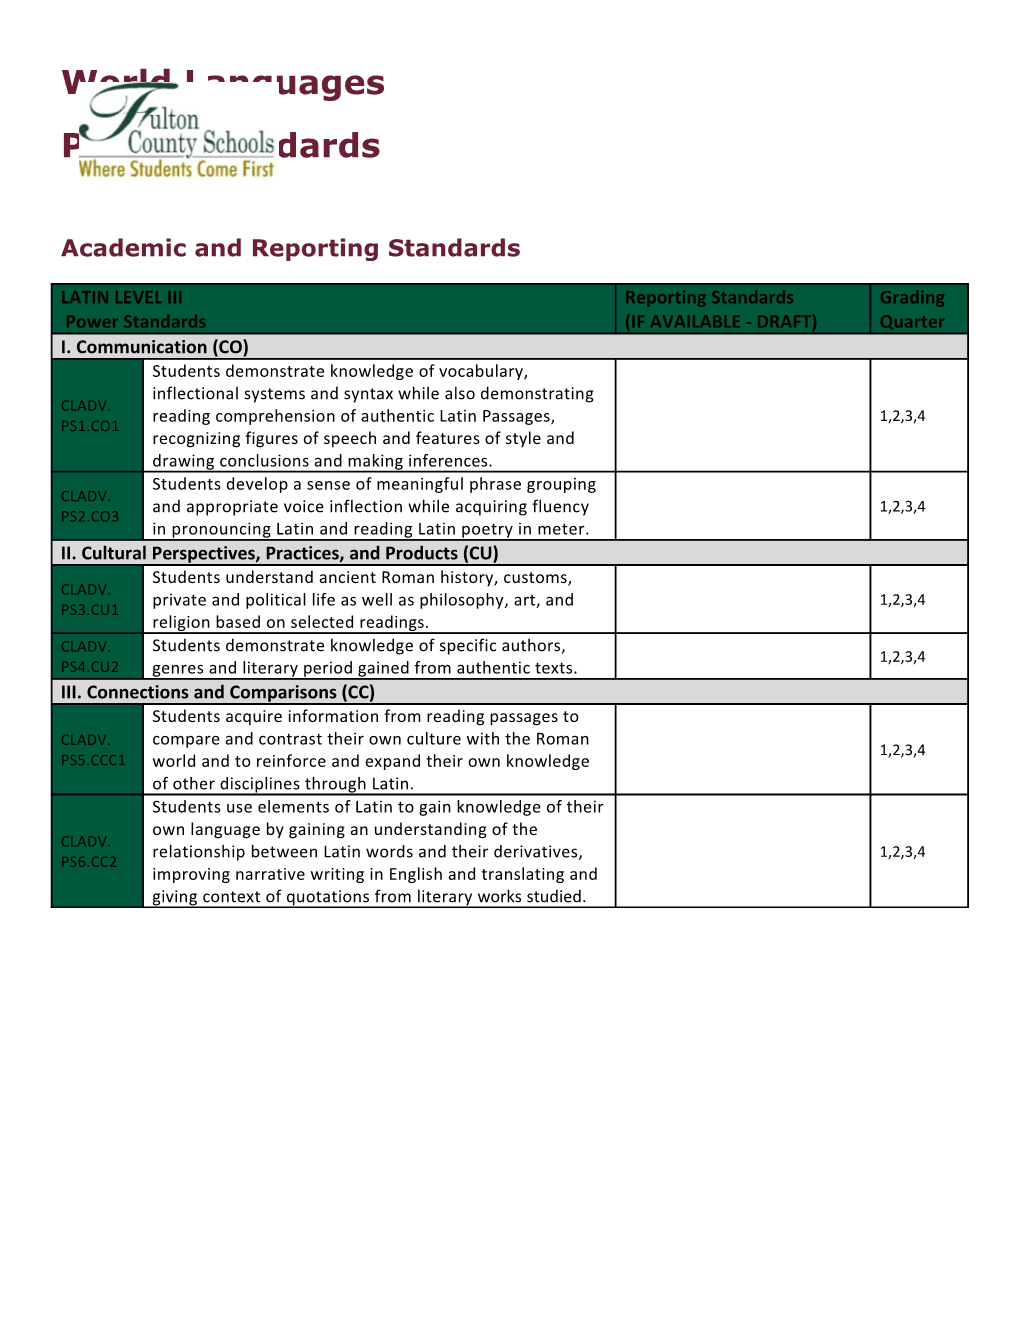 ELA Sixth Grade Power and Reporting Standards